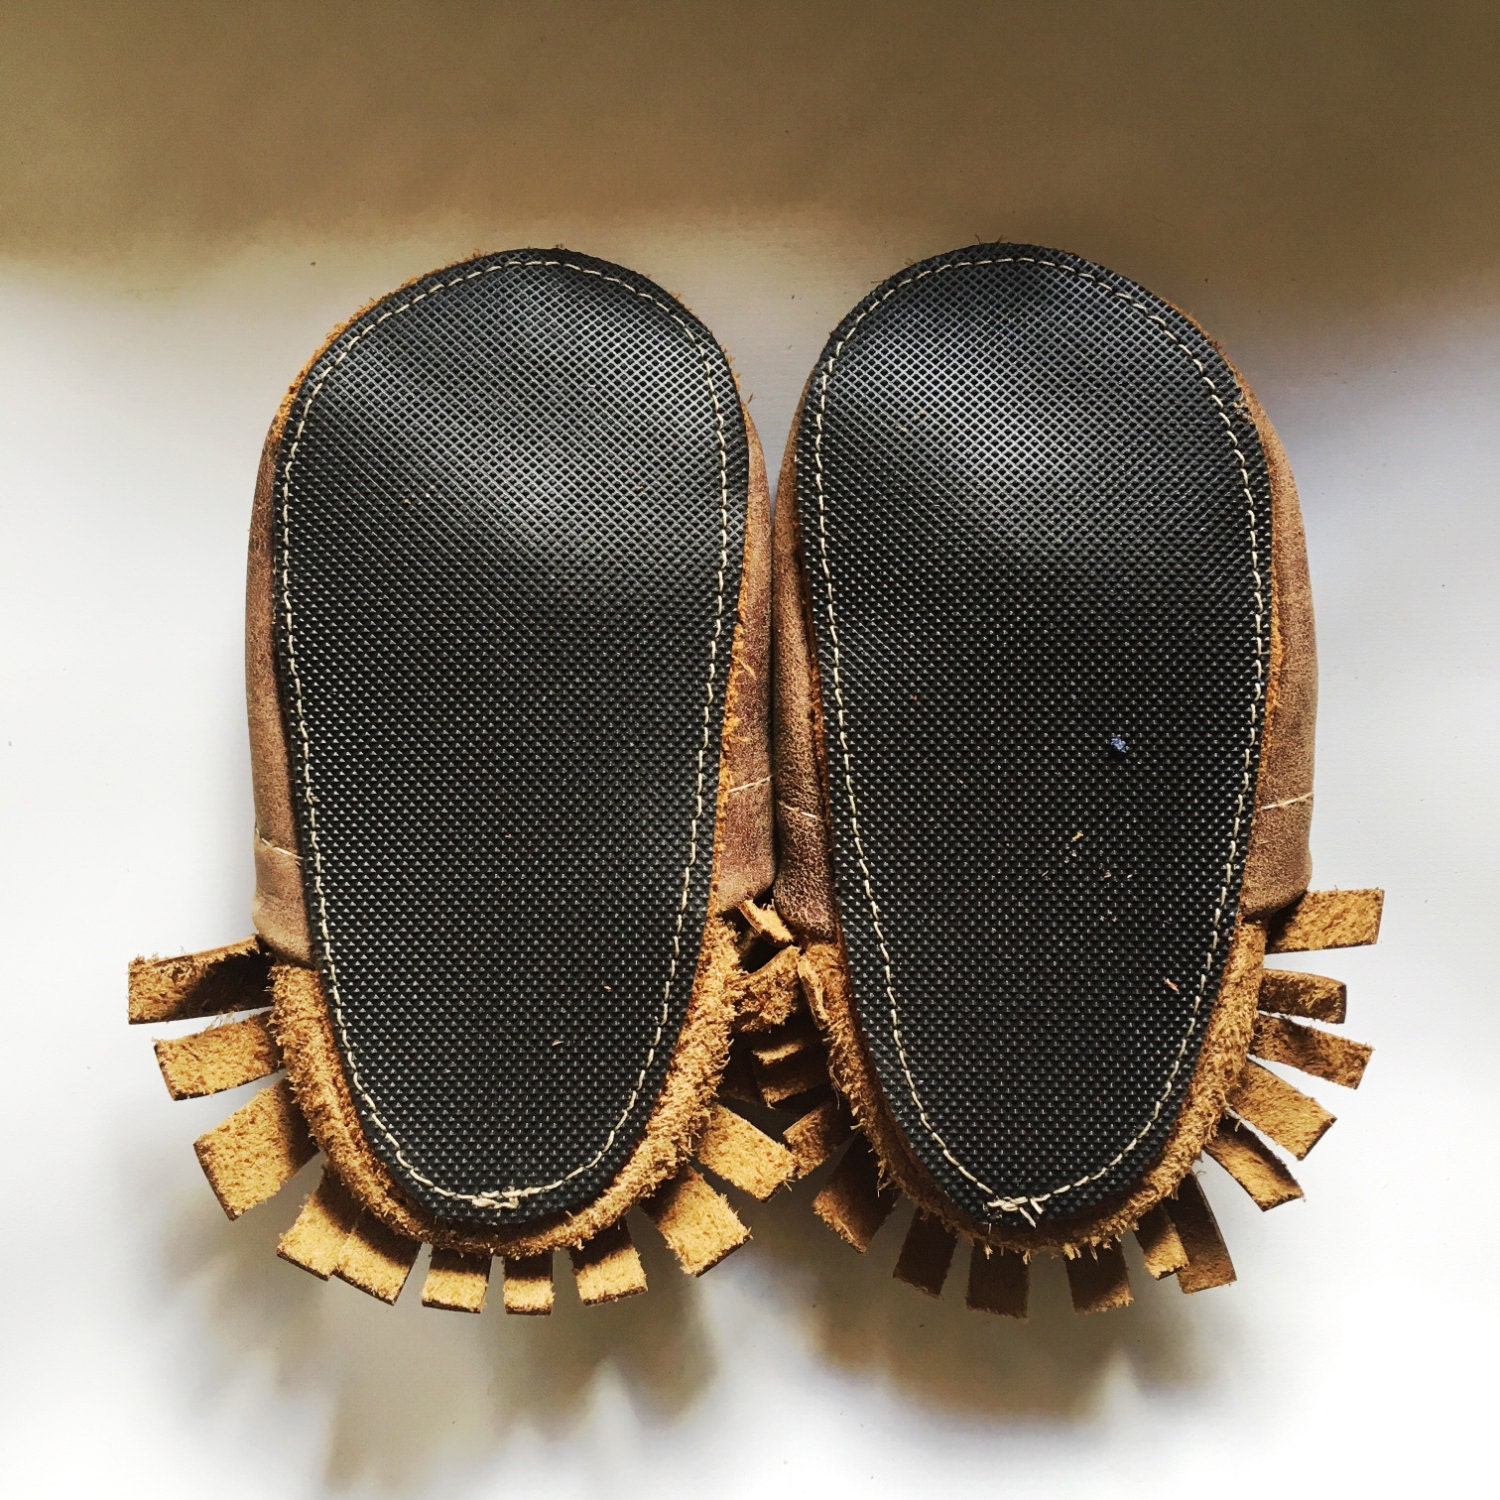 ADD//BIG Runner//Thin Rubber Sole to Shoes or Moccs or Boots